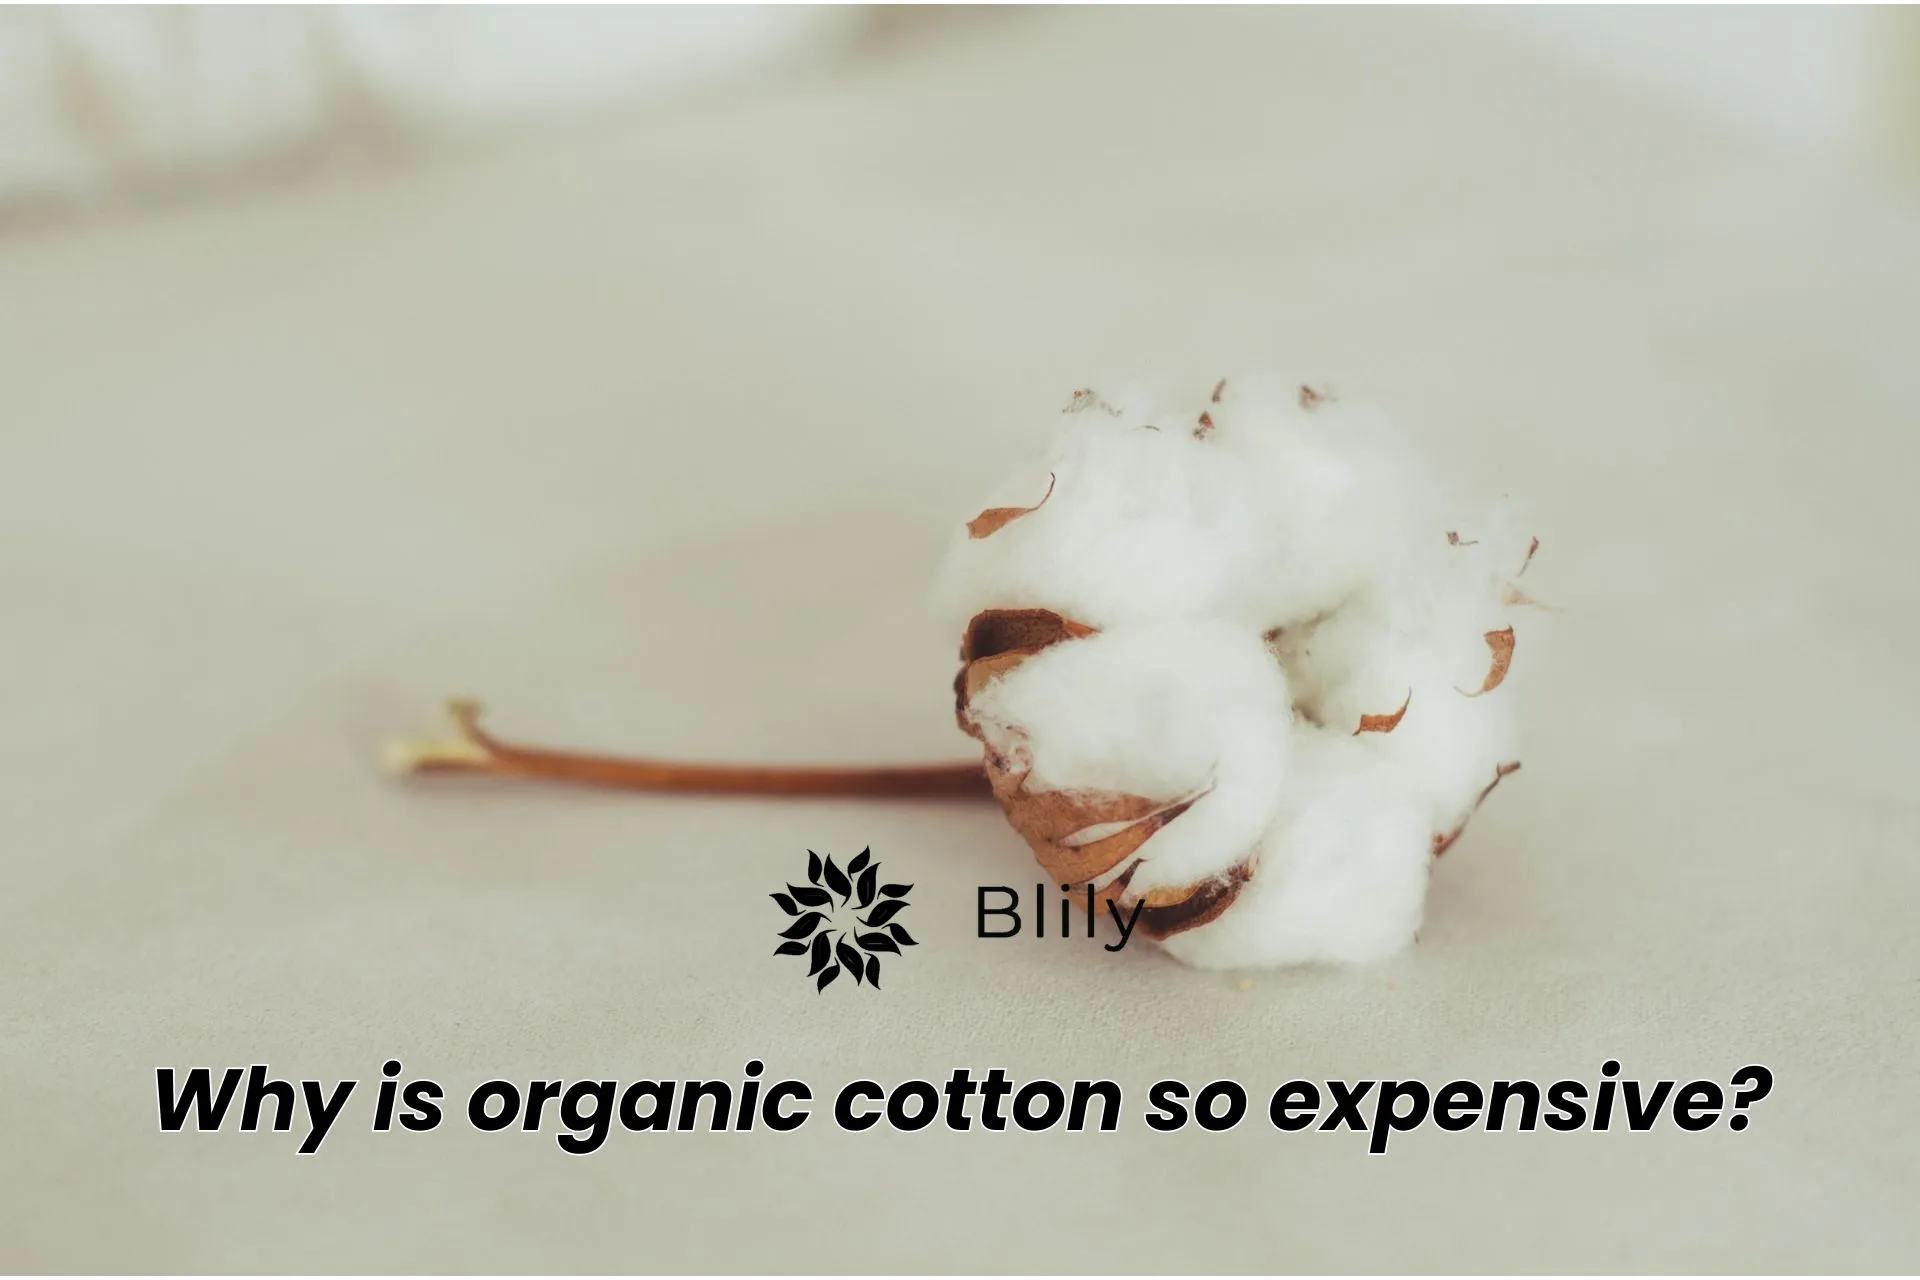 When It Comes To Sustainable Cotton, Fashion's Focused On 1% at the Expense  Of The Other 99. Why?